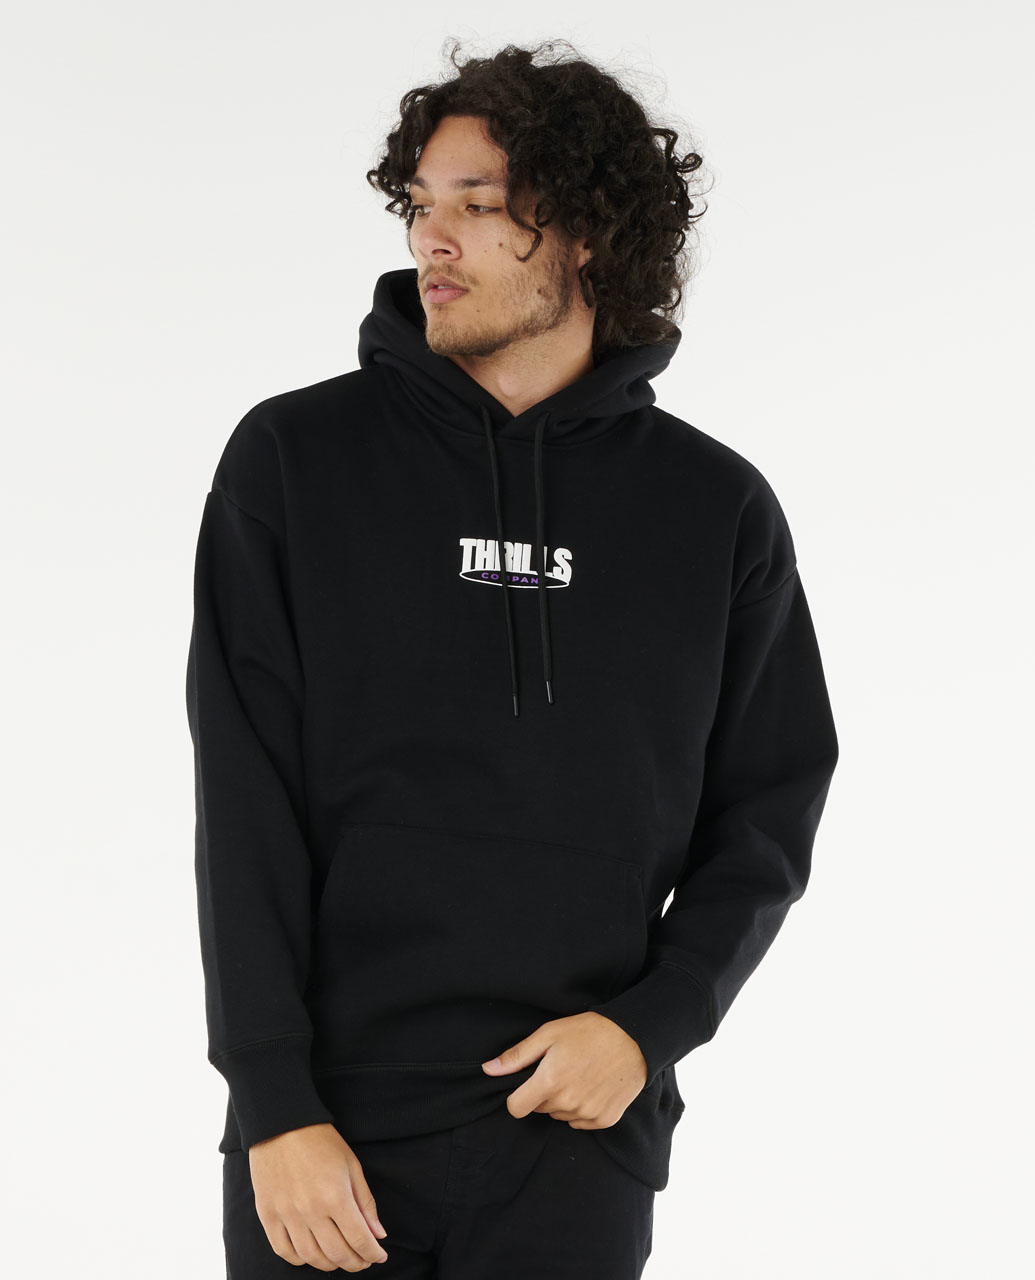 Shelter Reality Slouch Hood